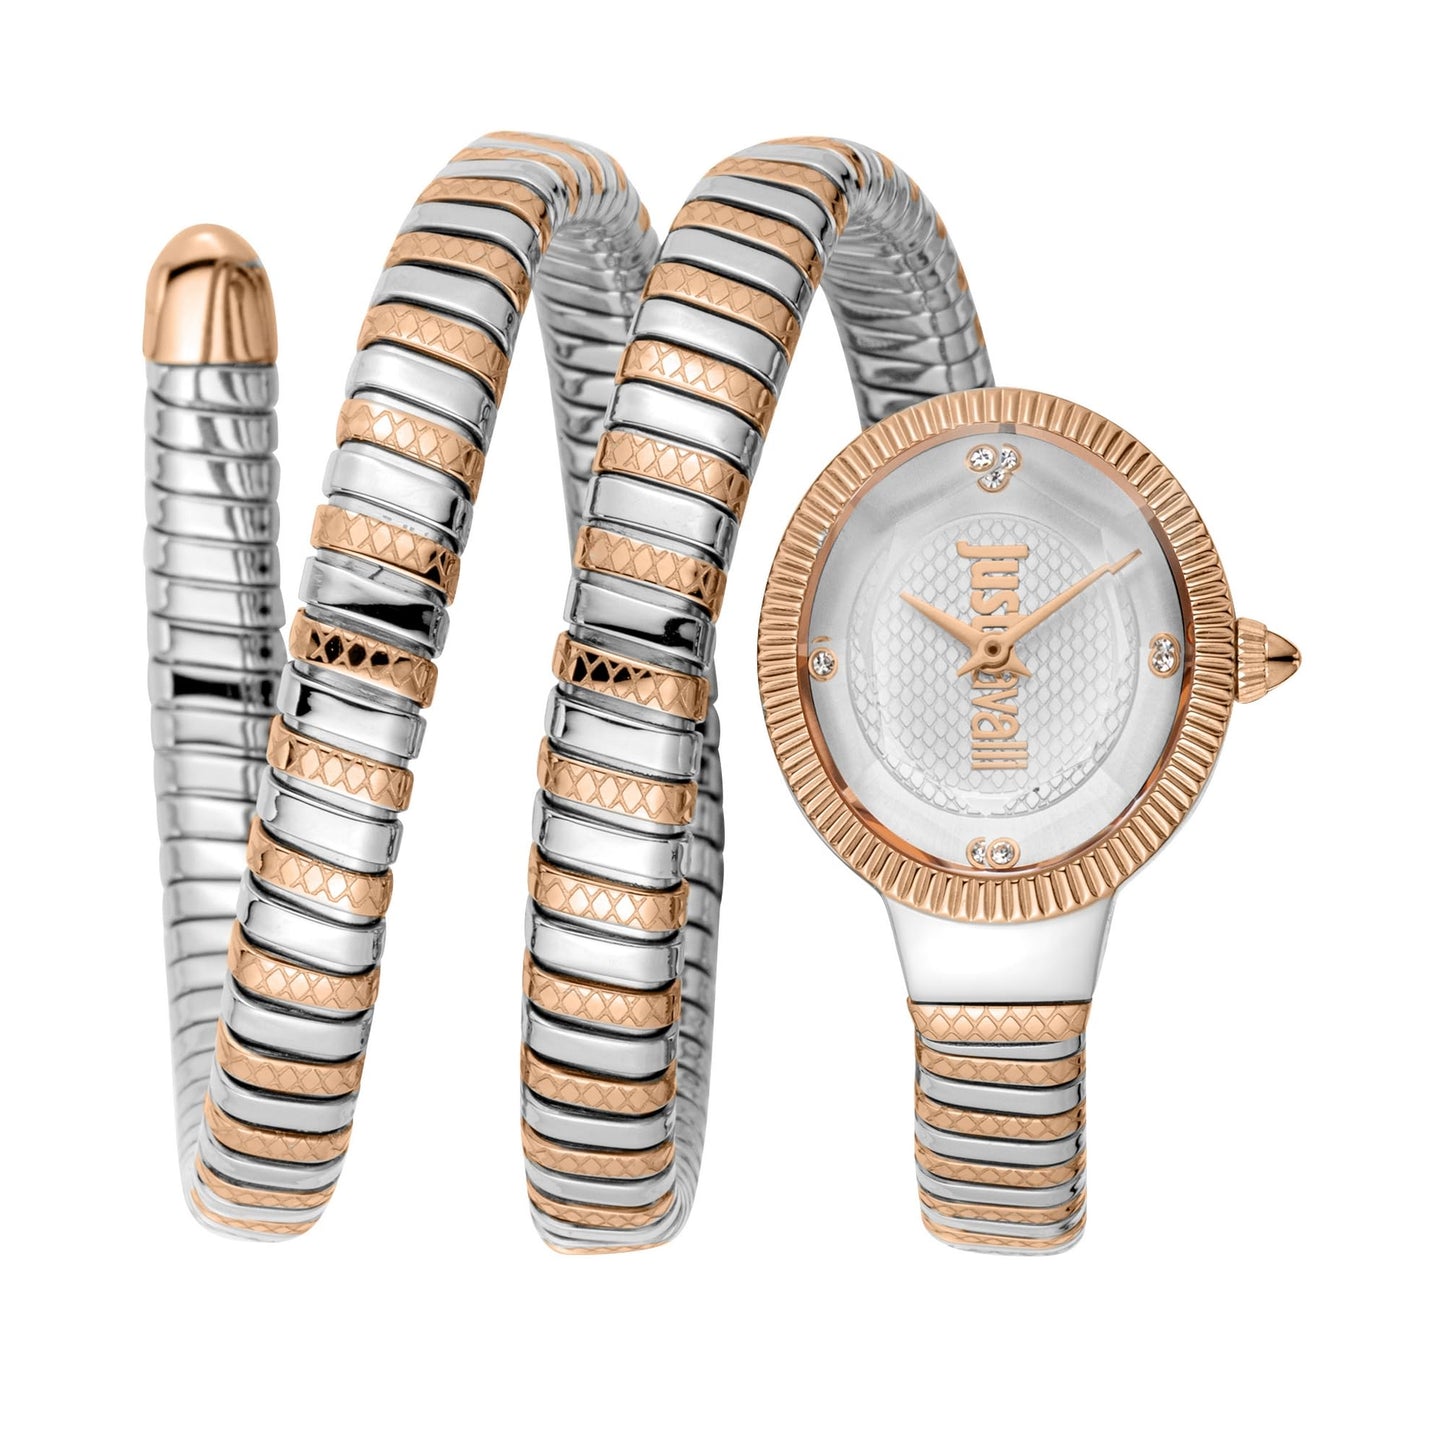 Just Cavalli Women Watch, Rose Gold Color Case, Black Dial, Two Tone Black & Rose Gold Color Metal Bracelet, 2 Hands, 3 ATM (Two Tone Silver & Rose Gold Color)